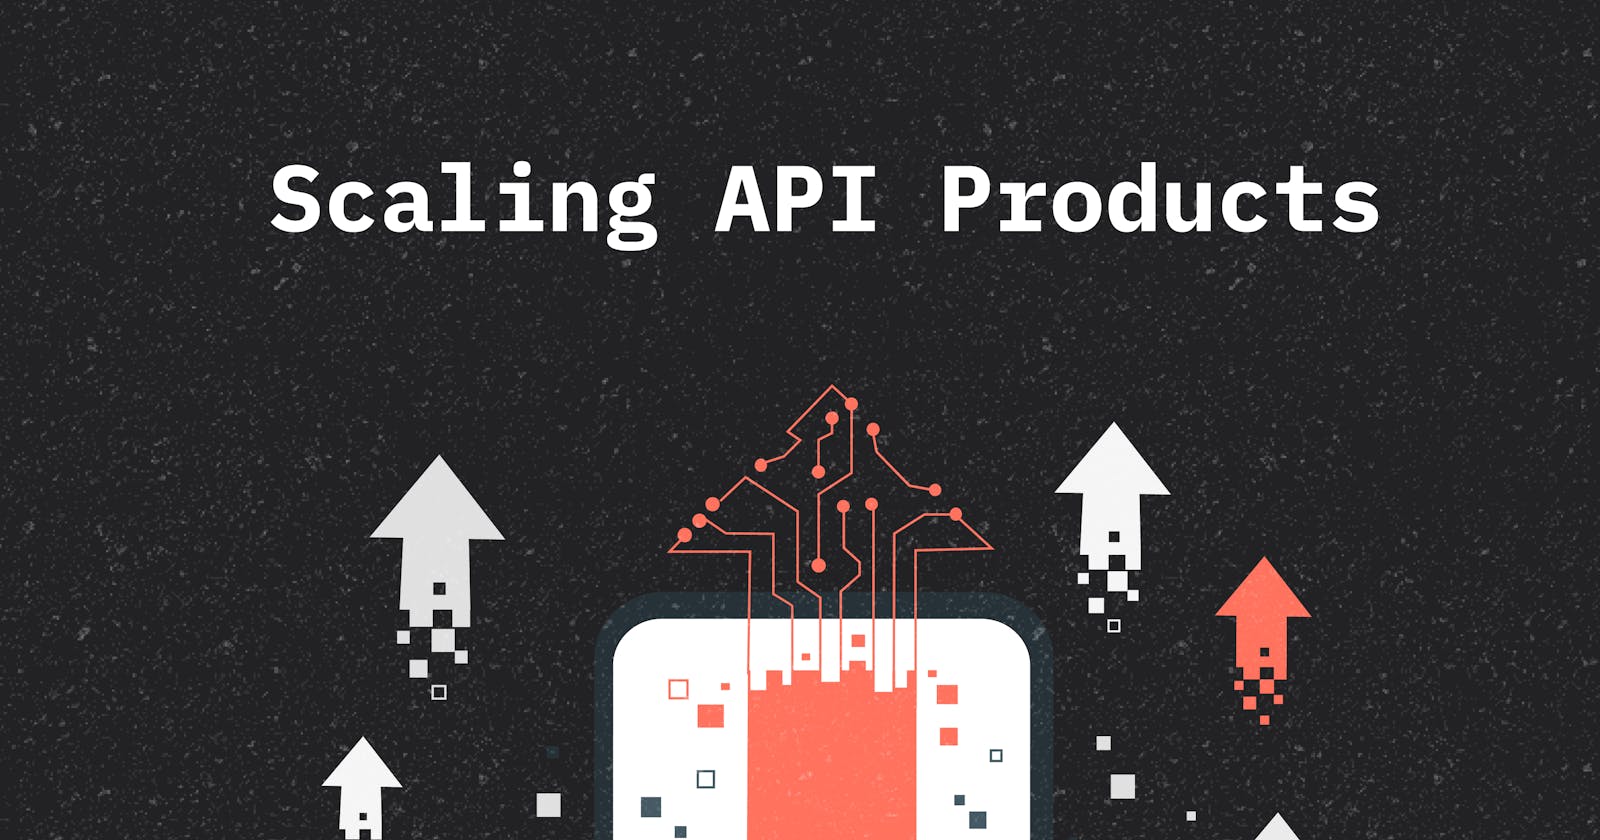 Best Practices For Scaling API Products